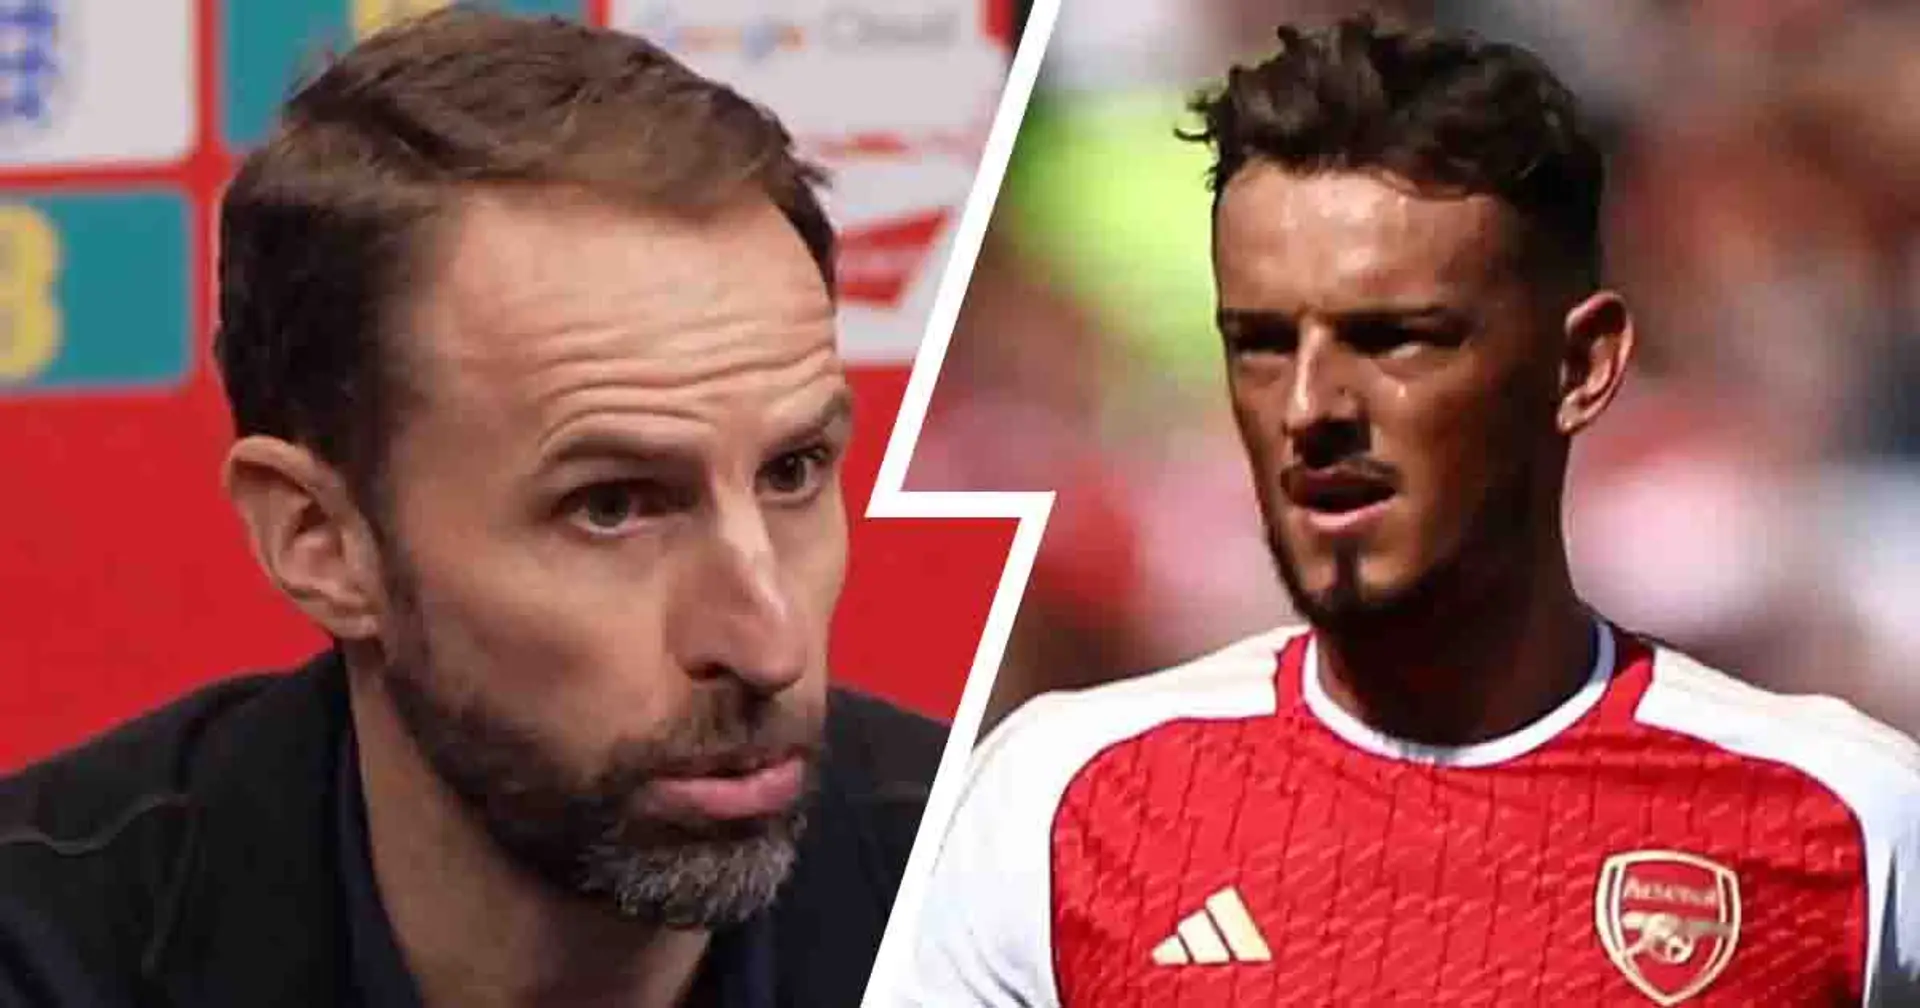 ‘It’s a great shame’: Southgate explains Ben White’s absence from England squad as 3 Arsenal stars named